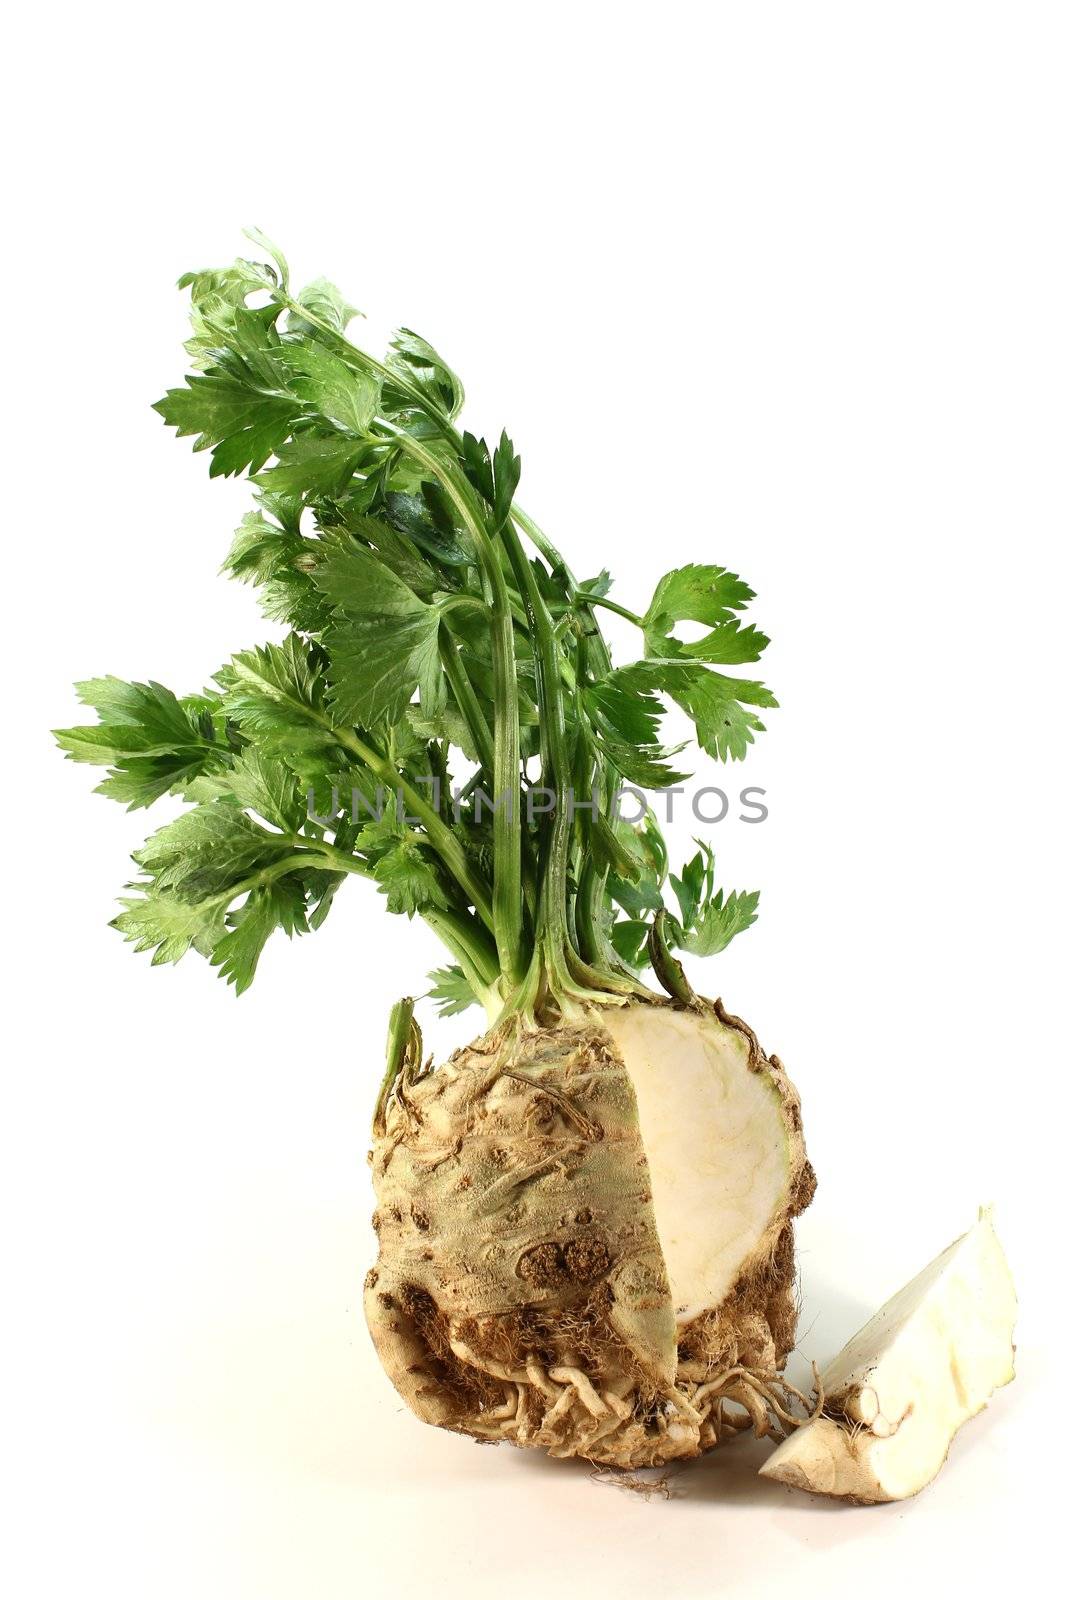 capped celery with green leaves on white background